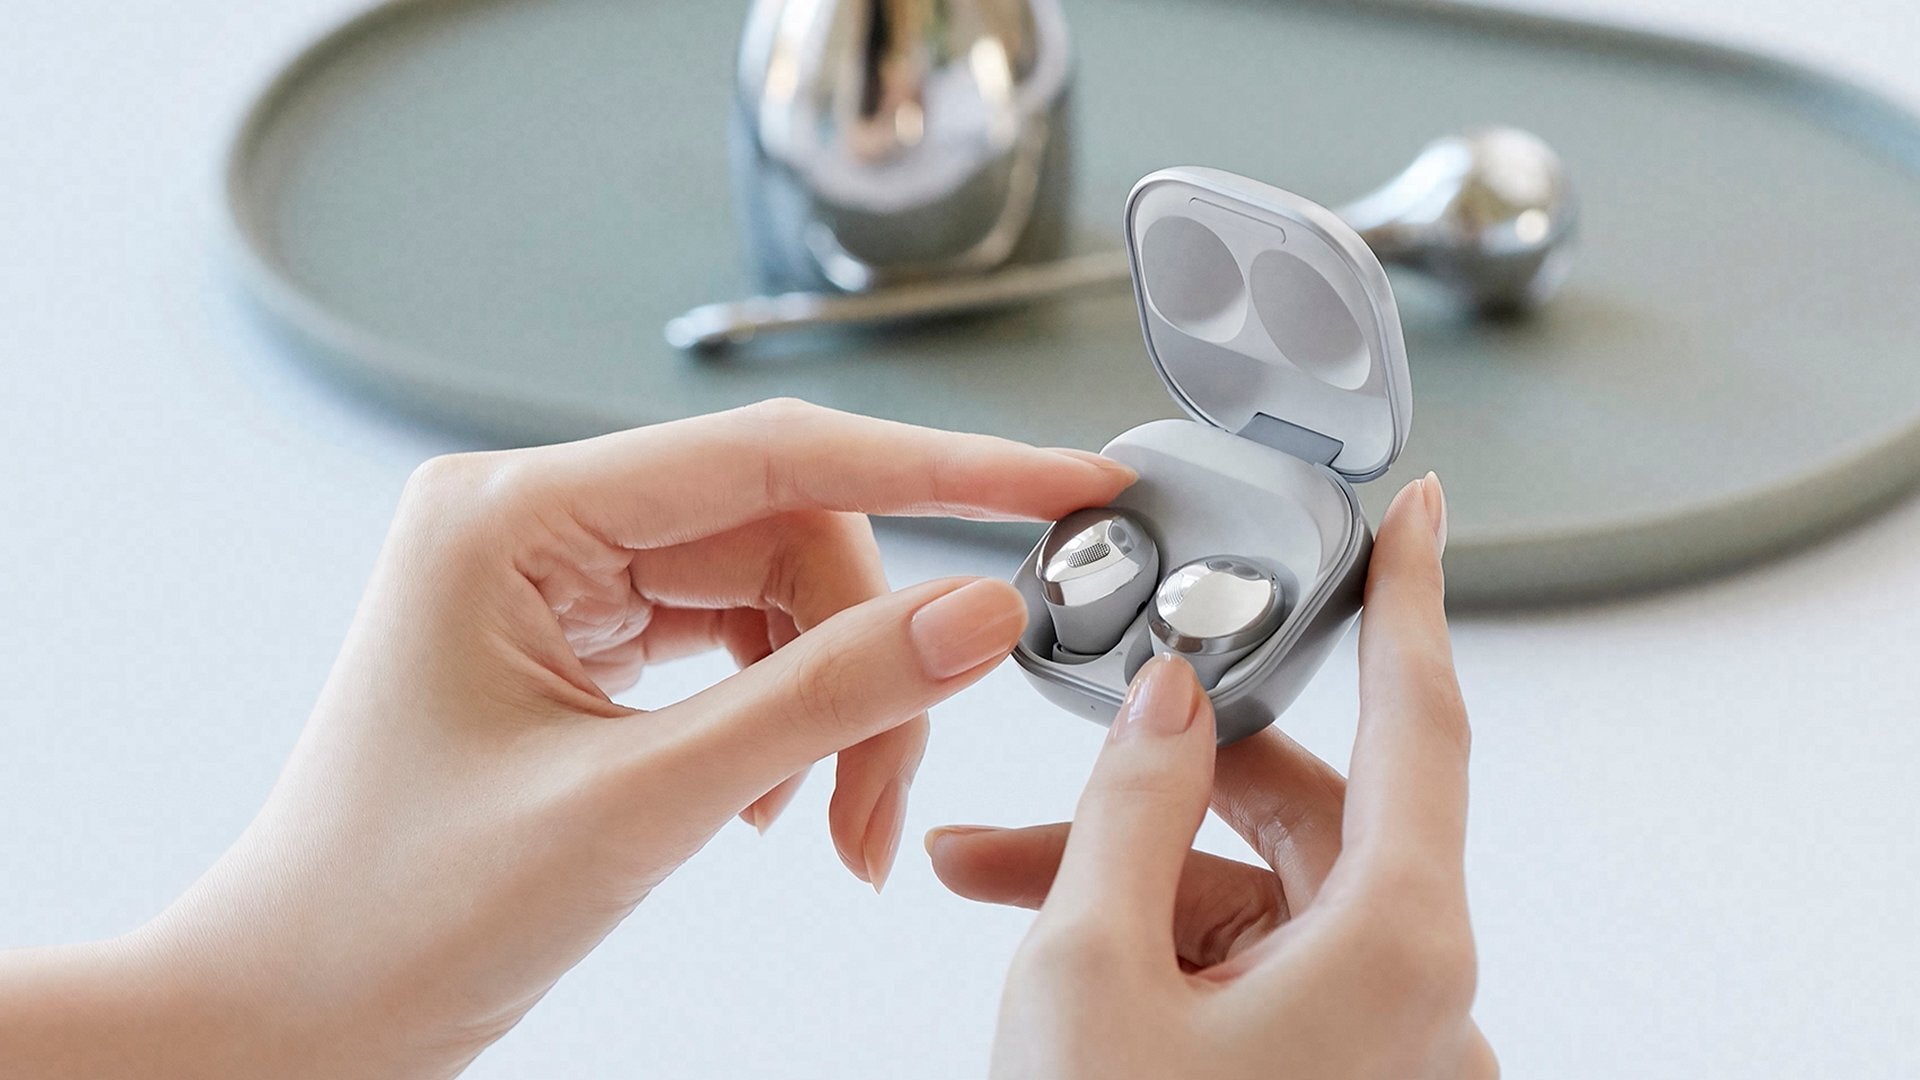 Samsung Galaxy Buds Pro - Image credit - PhoneArena - The Best Galaxy Buds you can buy - five hand-picked models